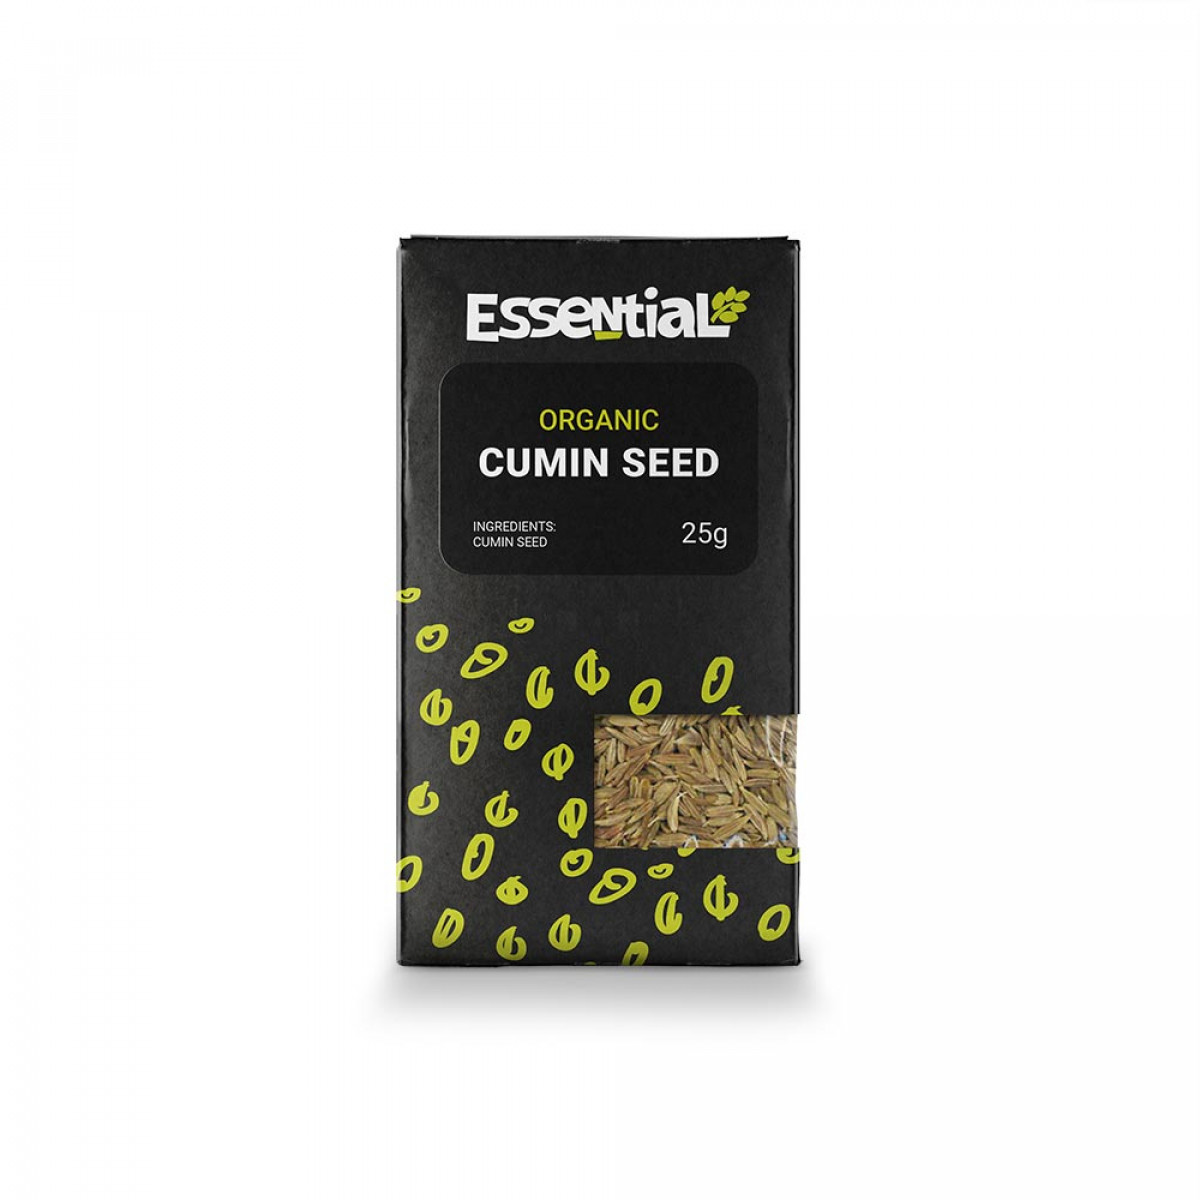 Product picture for Cumin Seed